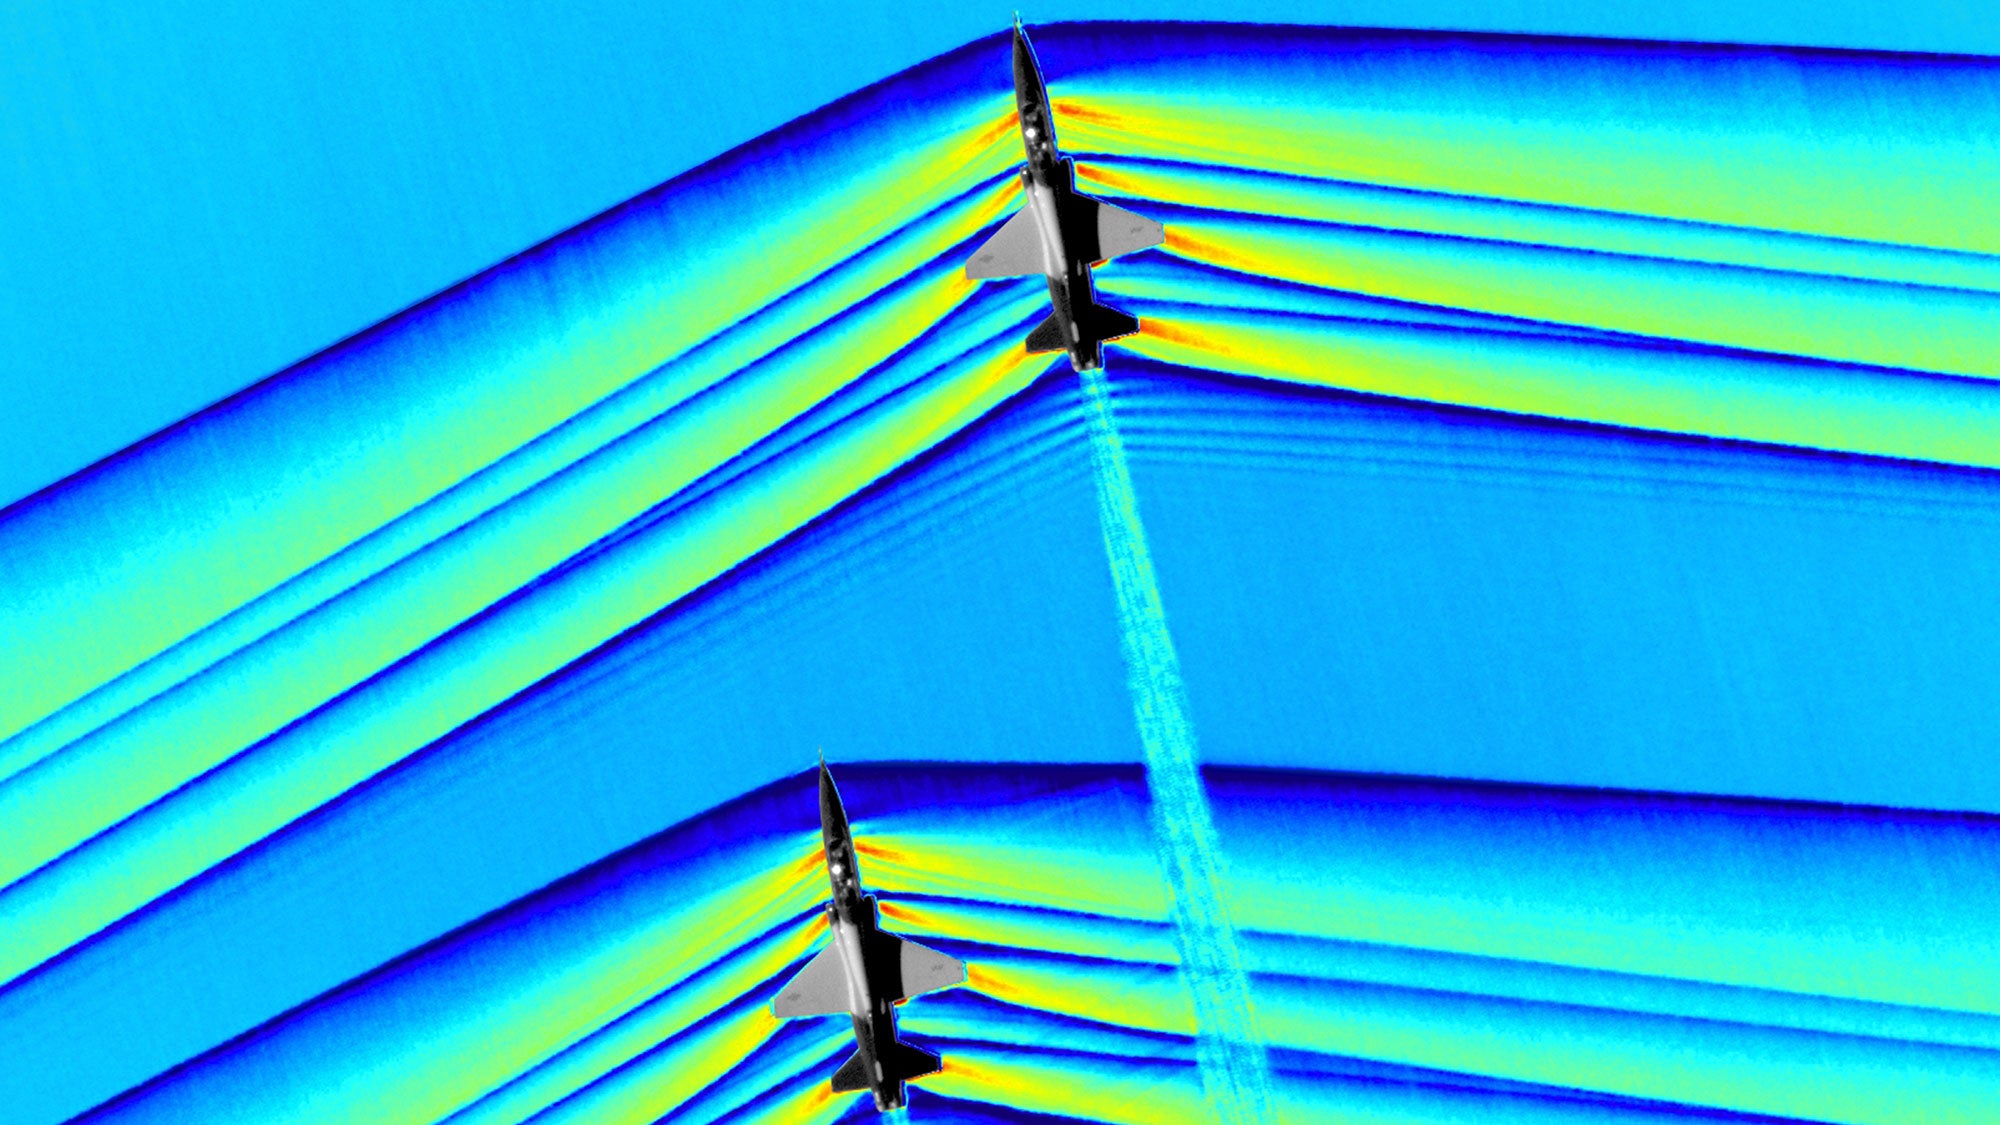 shock waves coming from supersonic jets